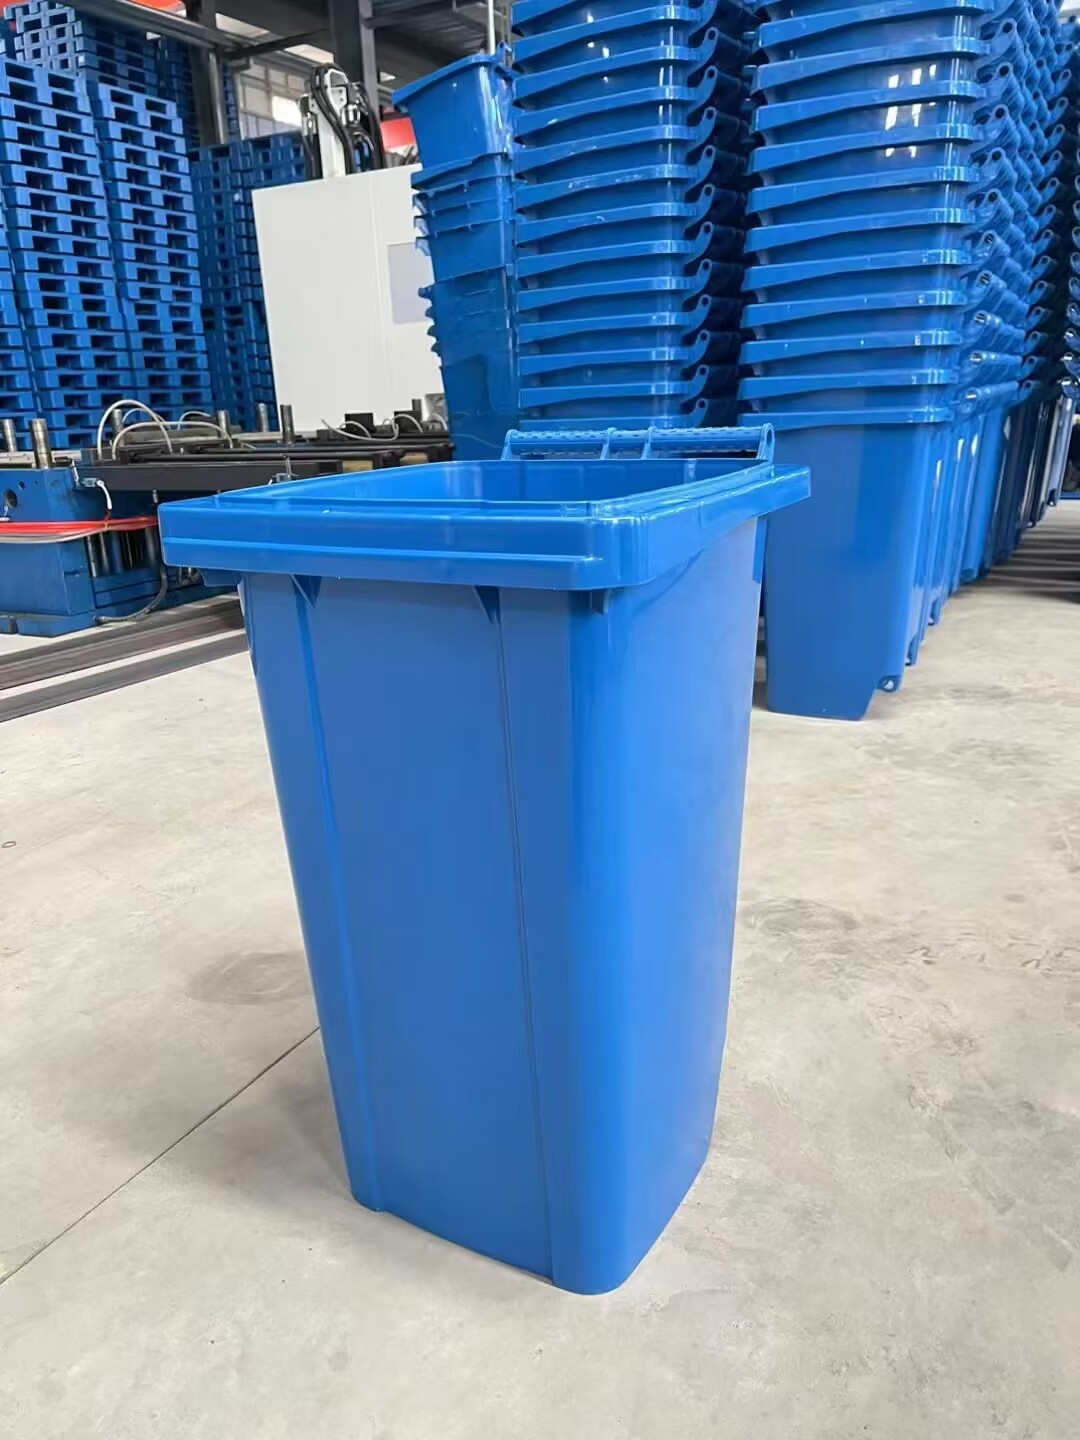 Low Price Garbage Containers in production